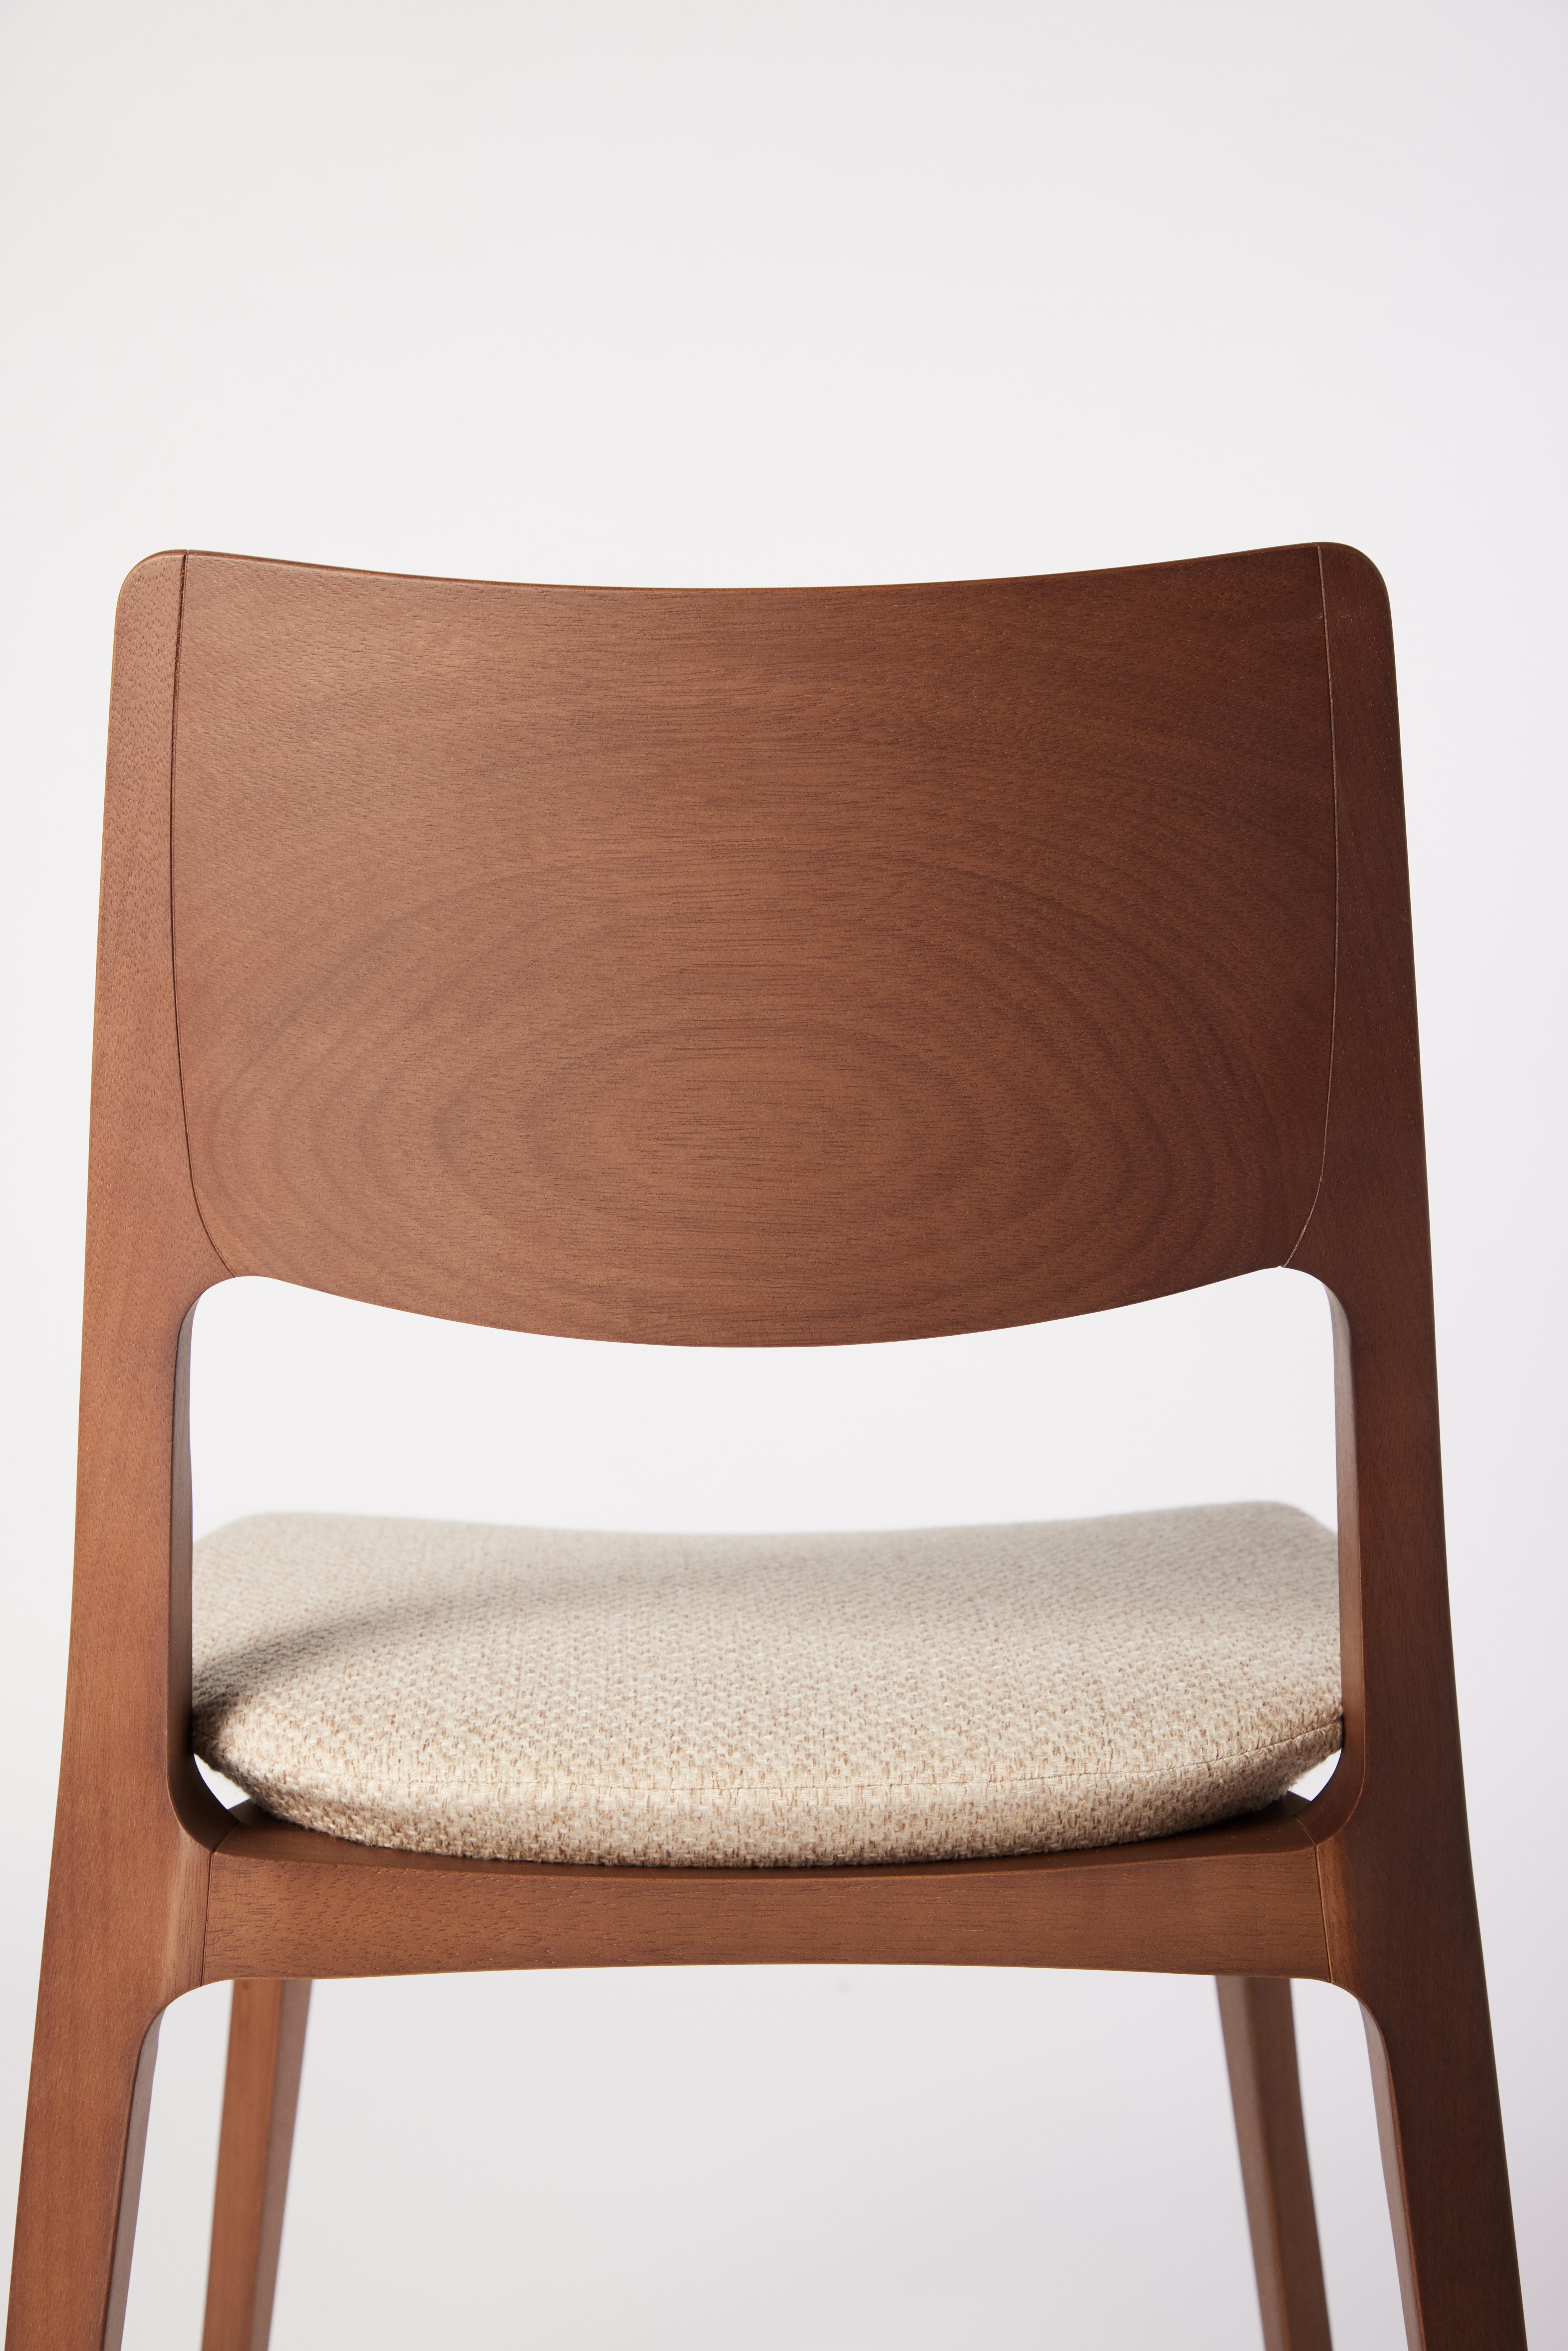 Vannerie The Moderns Aurora Chair Sculptured in Walnut Finish No Arms, Upholstering Seat en vente